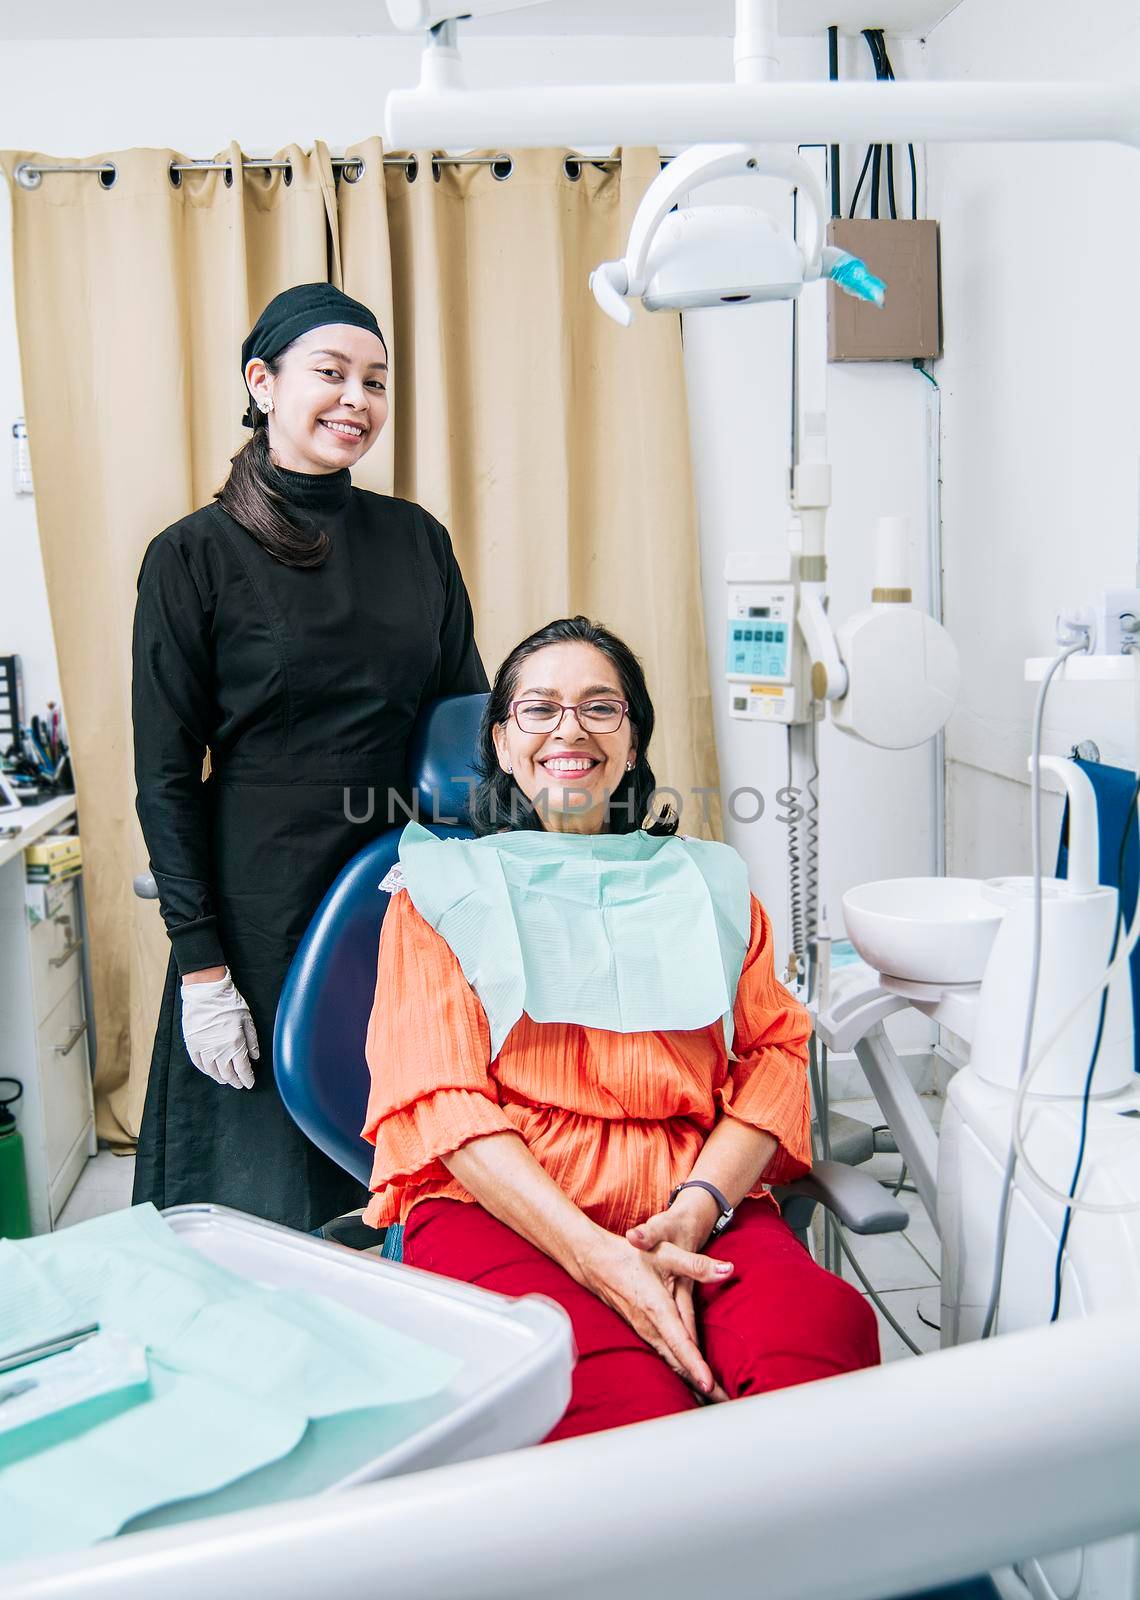 Dentist with patient smiling at camera in office, satisfied dentist and patient smiling at camera, satisfied dentist and patient concept